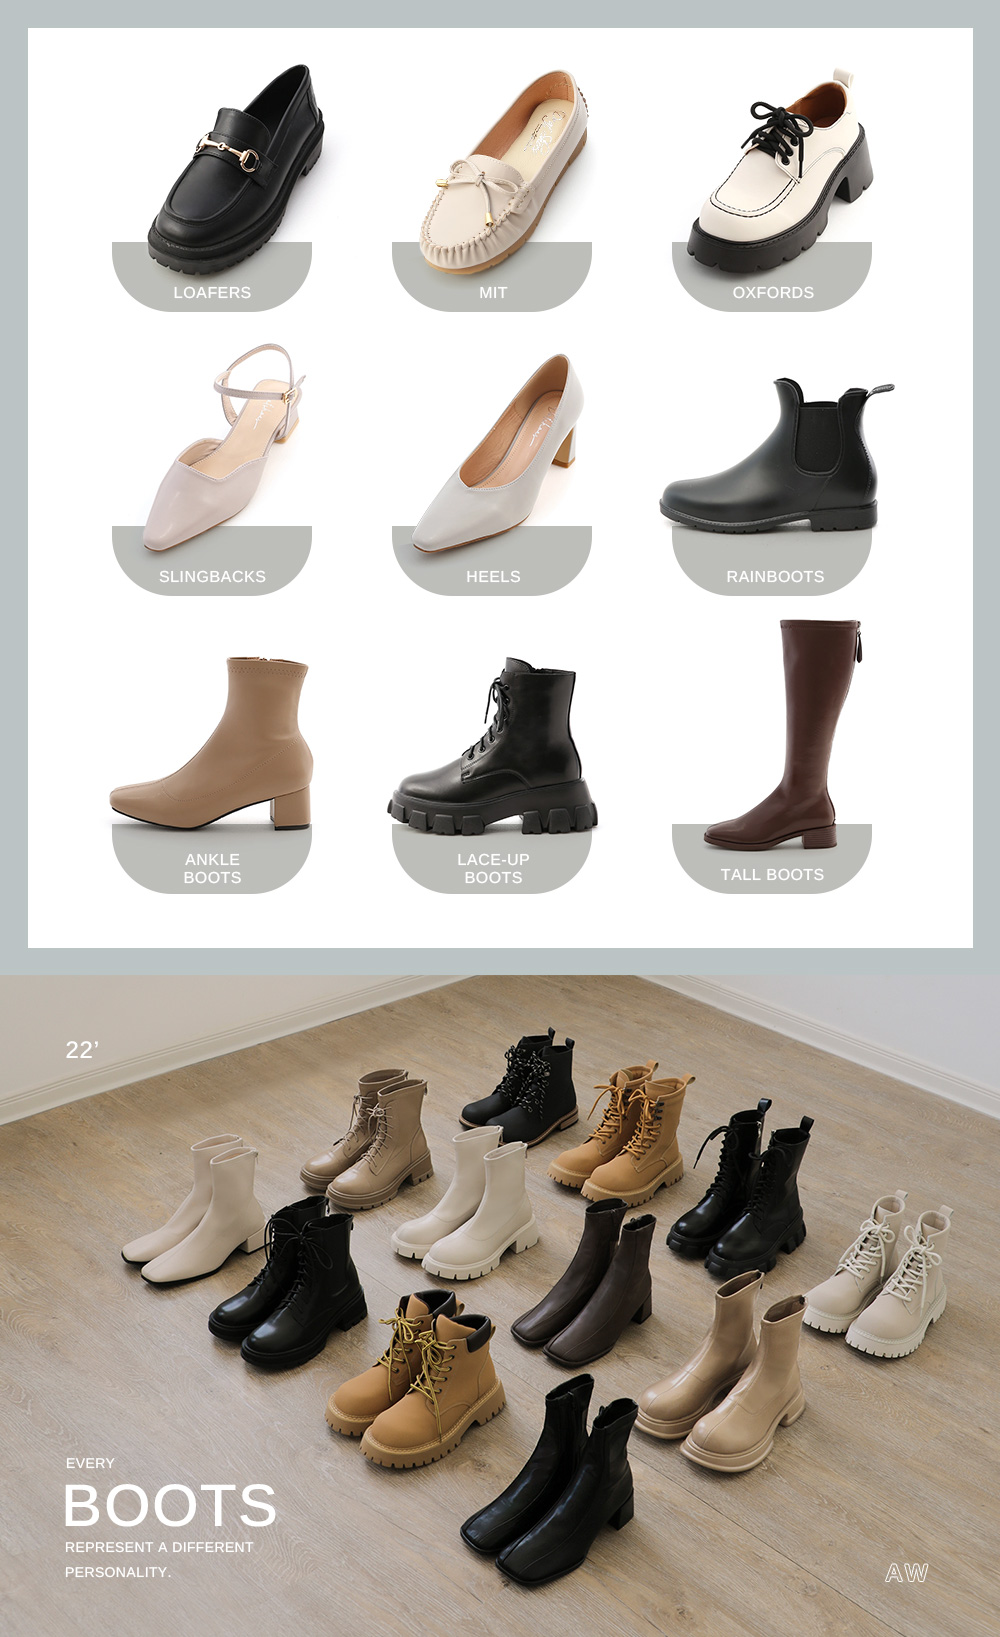 Your everyday shoes collection - all kind of trendy shoes including sandals, pumps, boots, heels,.